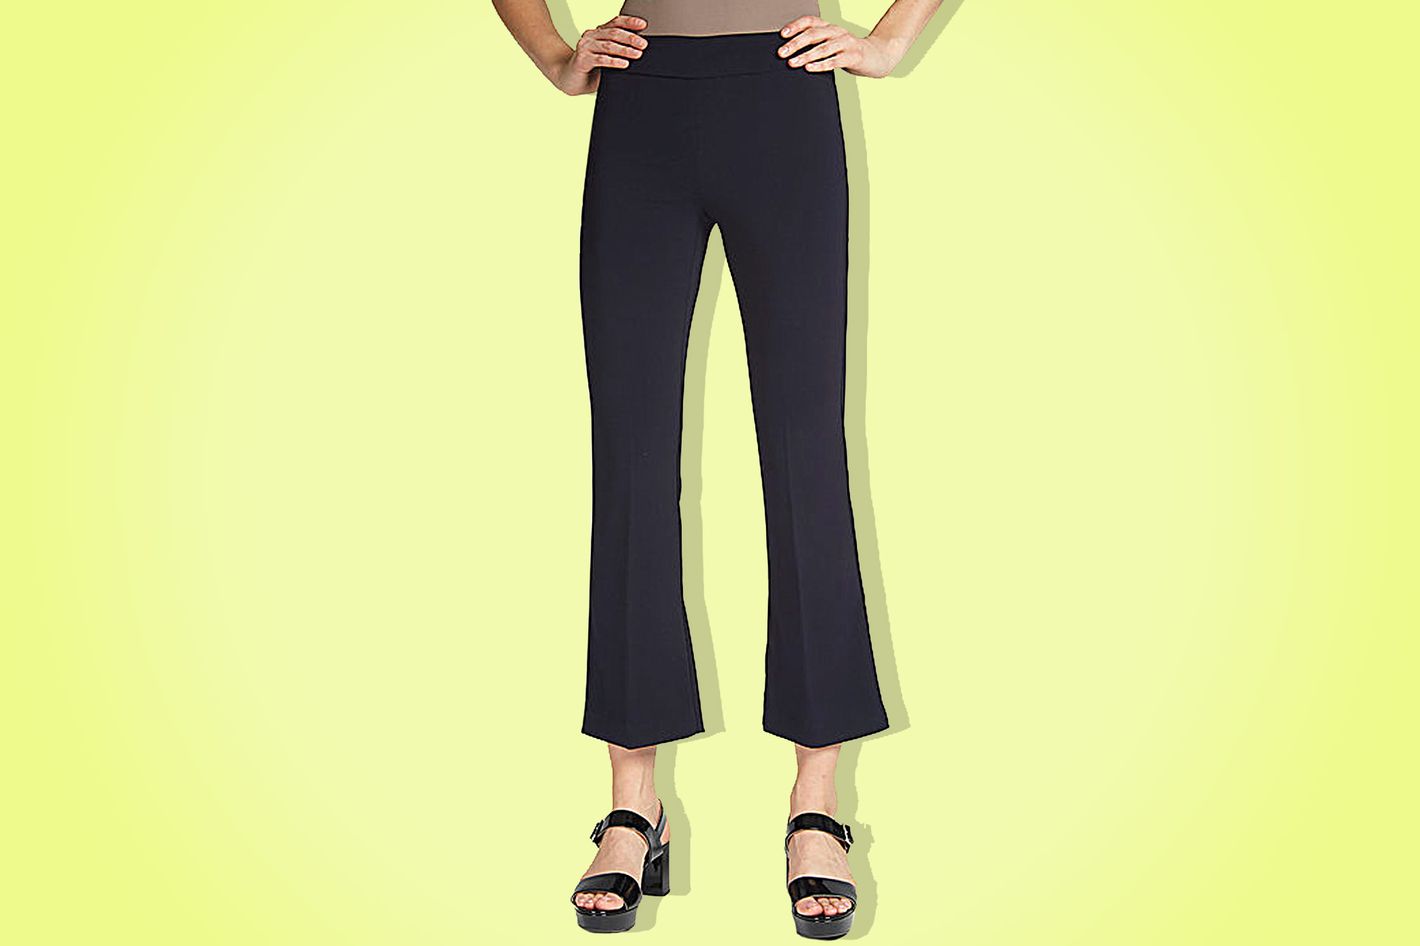 Marilyn Straight Pants Sculpt-Her™ Collection - Charcoal Heathered